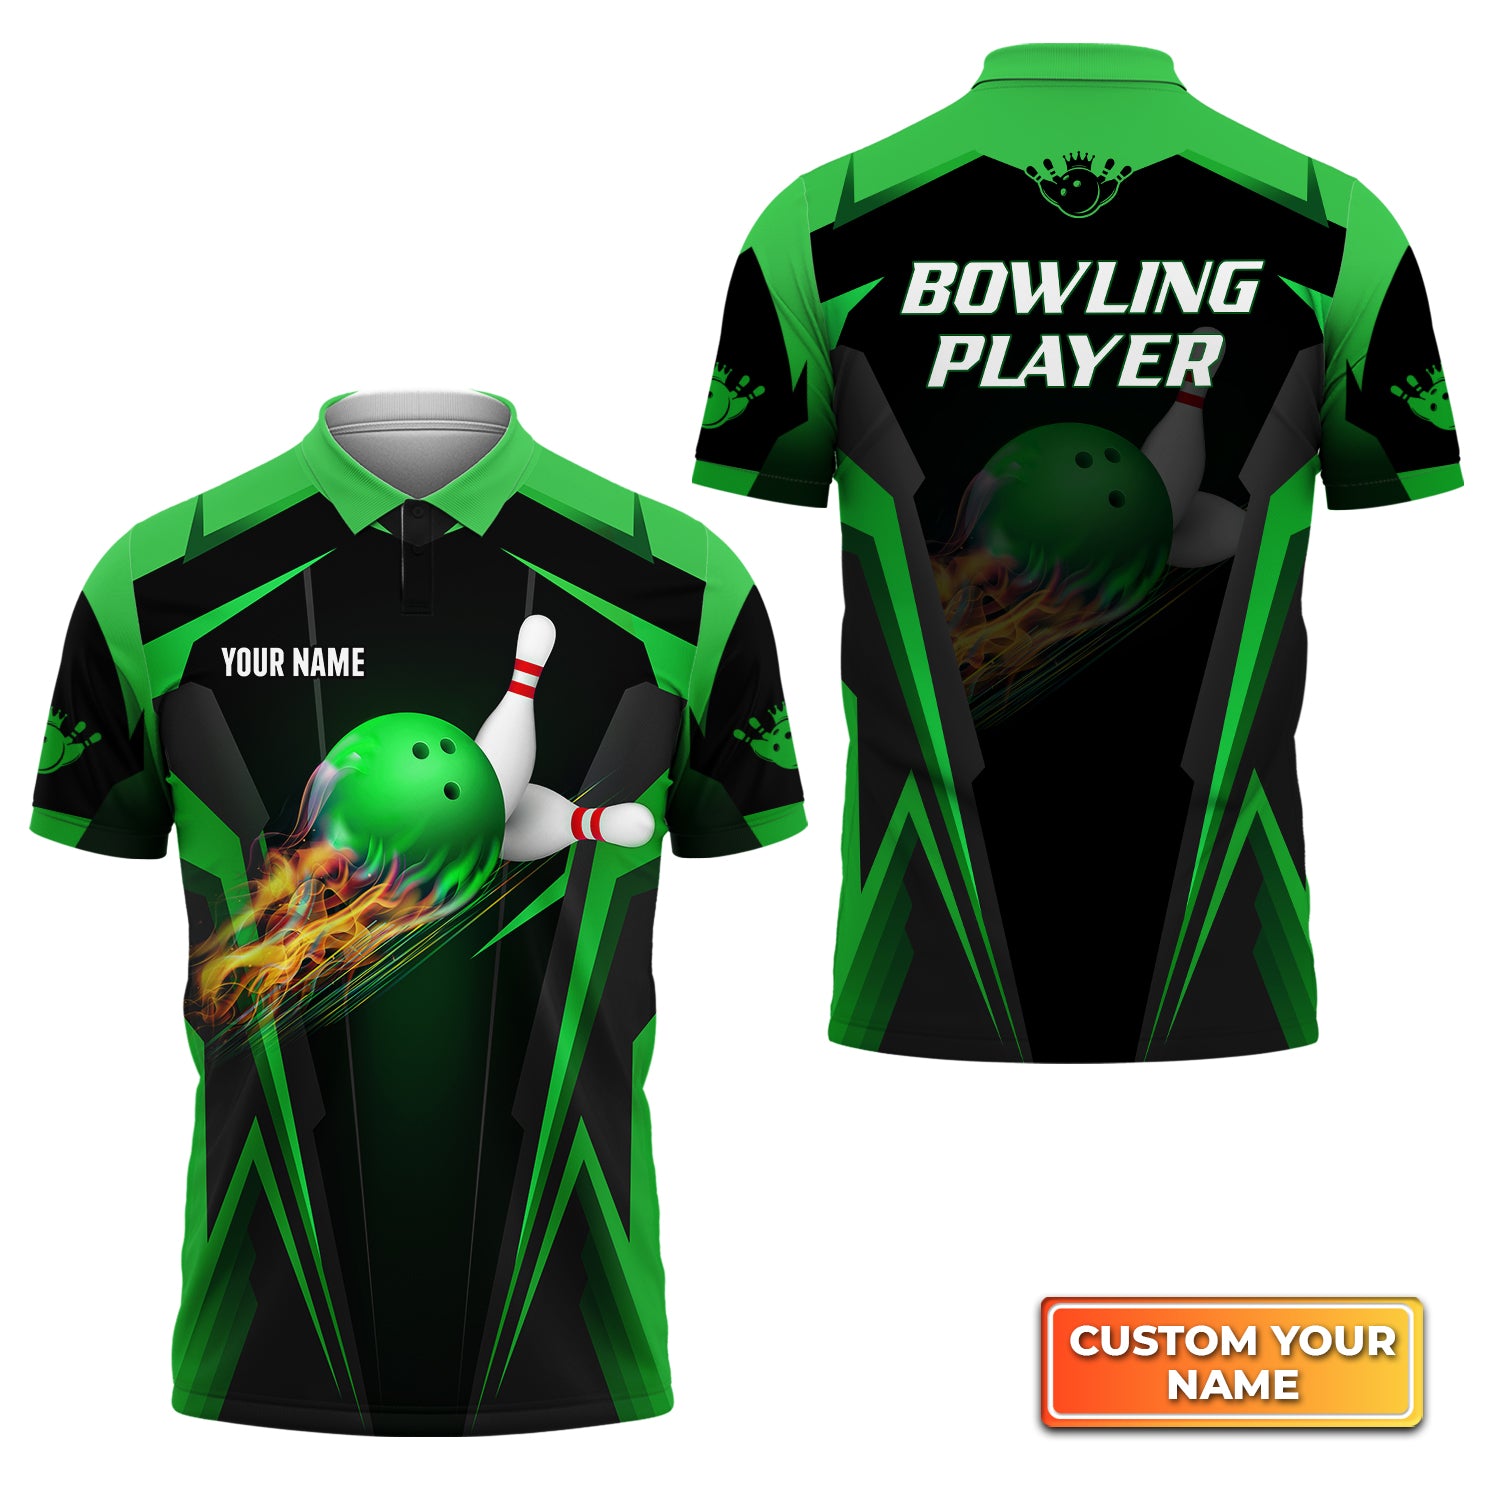 The Green Bowling Ball in Flames Breaks White Skittles Personalized Name 3D Polo Shirt QB95